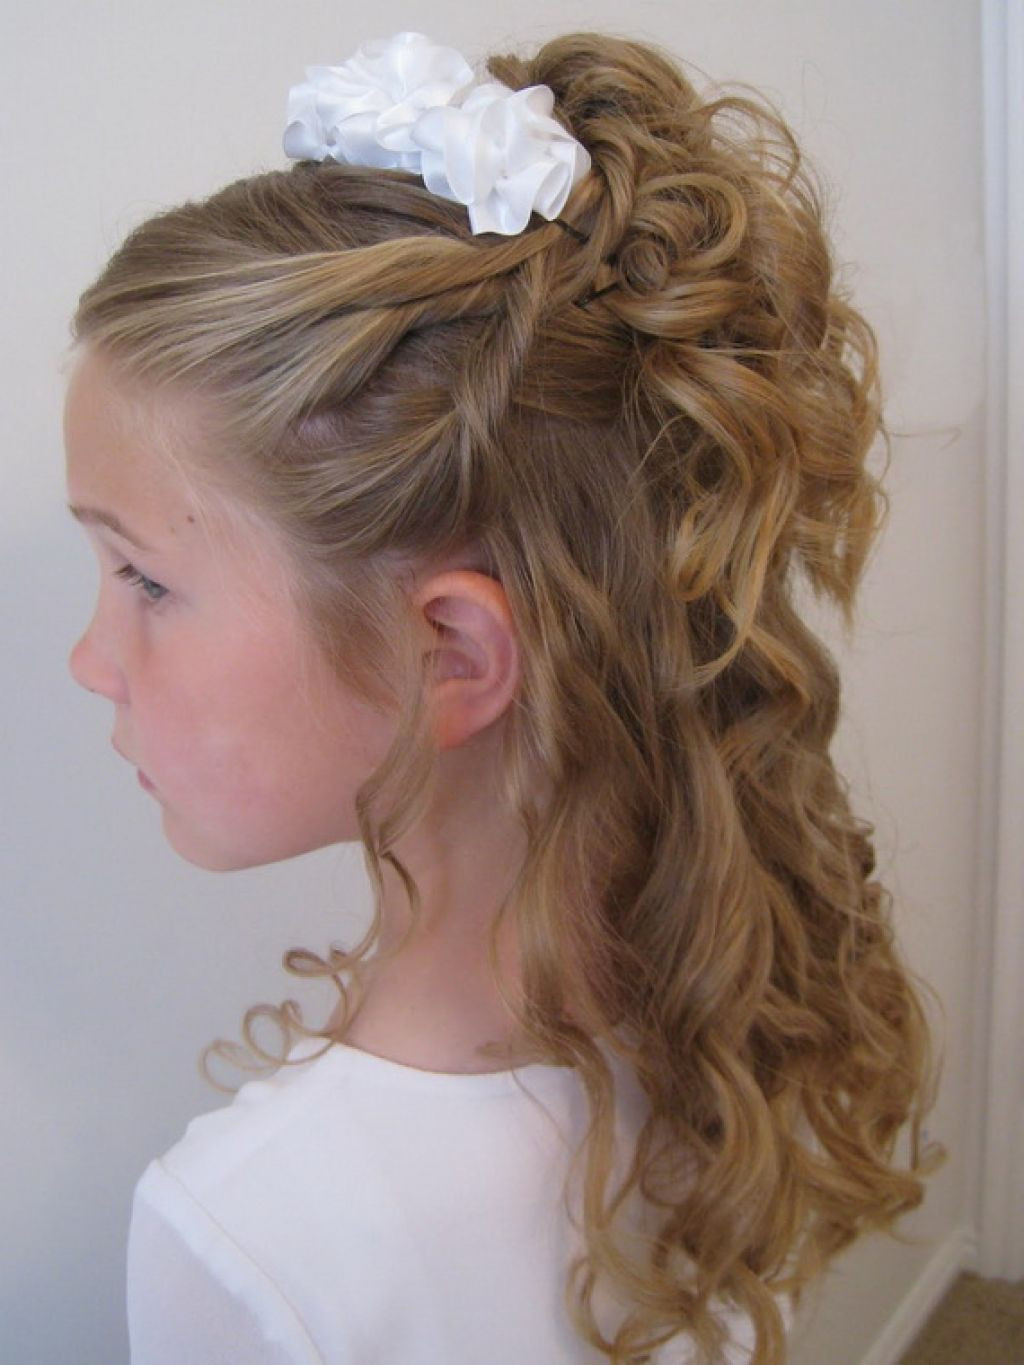 Lil Girl Hairstyles For Wedding
 20 Wedding Hairstyles For Kids Ideas wedding